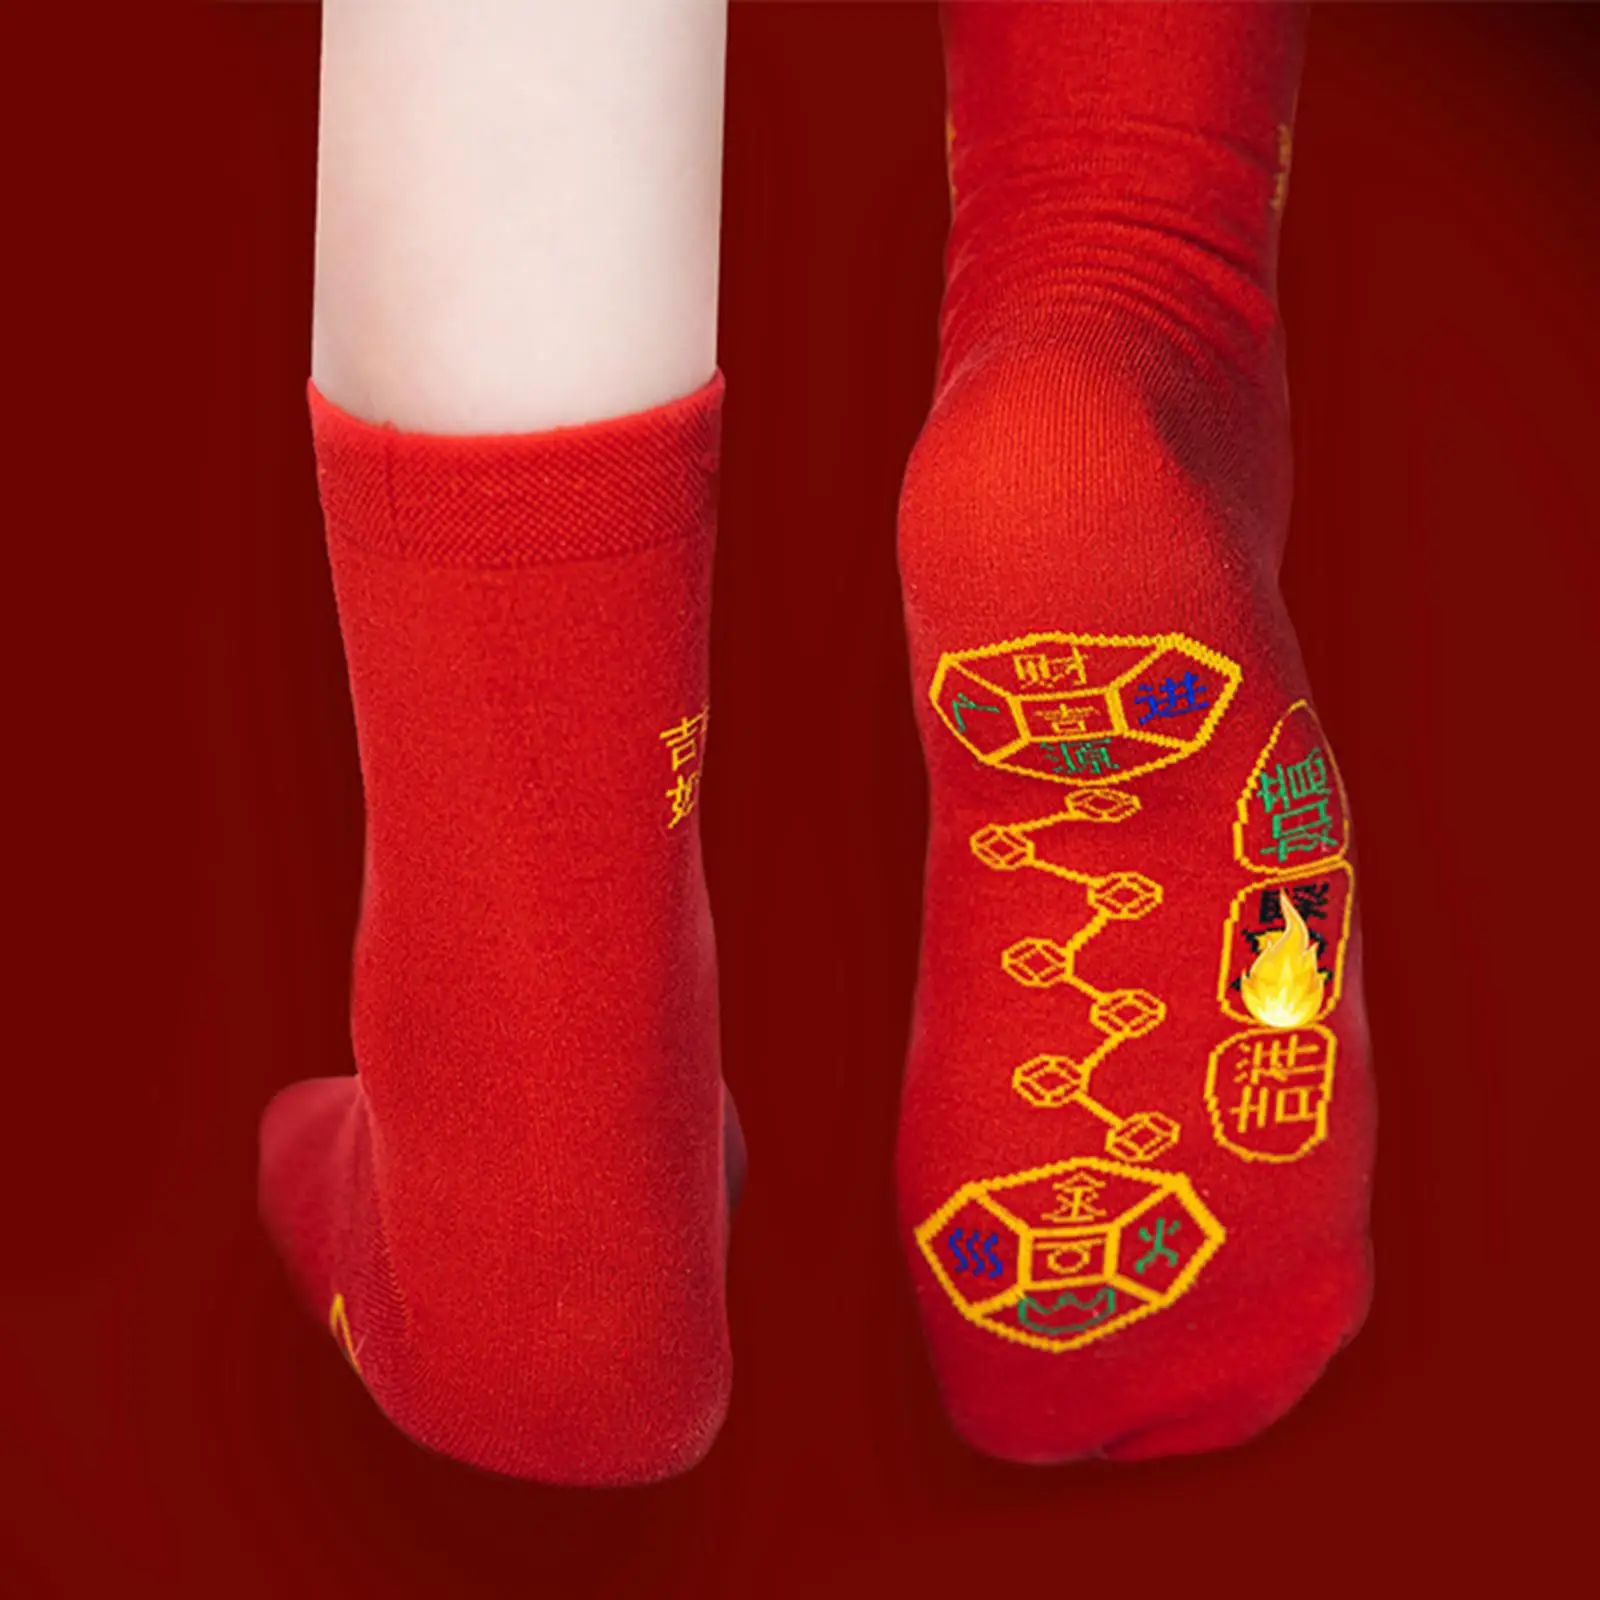 Chinese Lunar New Year Red Socks with Chinese Cultural Characteristics Warm Winter Soft Ankle Socks for Men Women Festival Socks